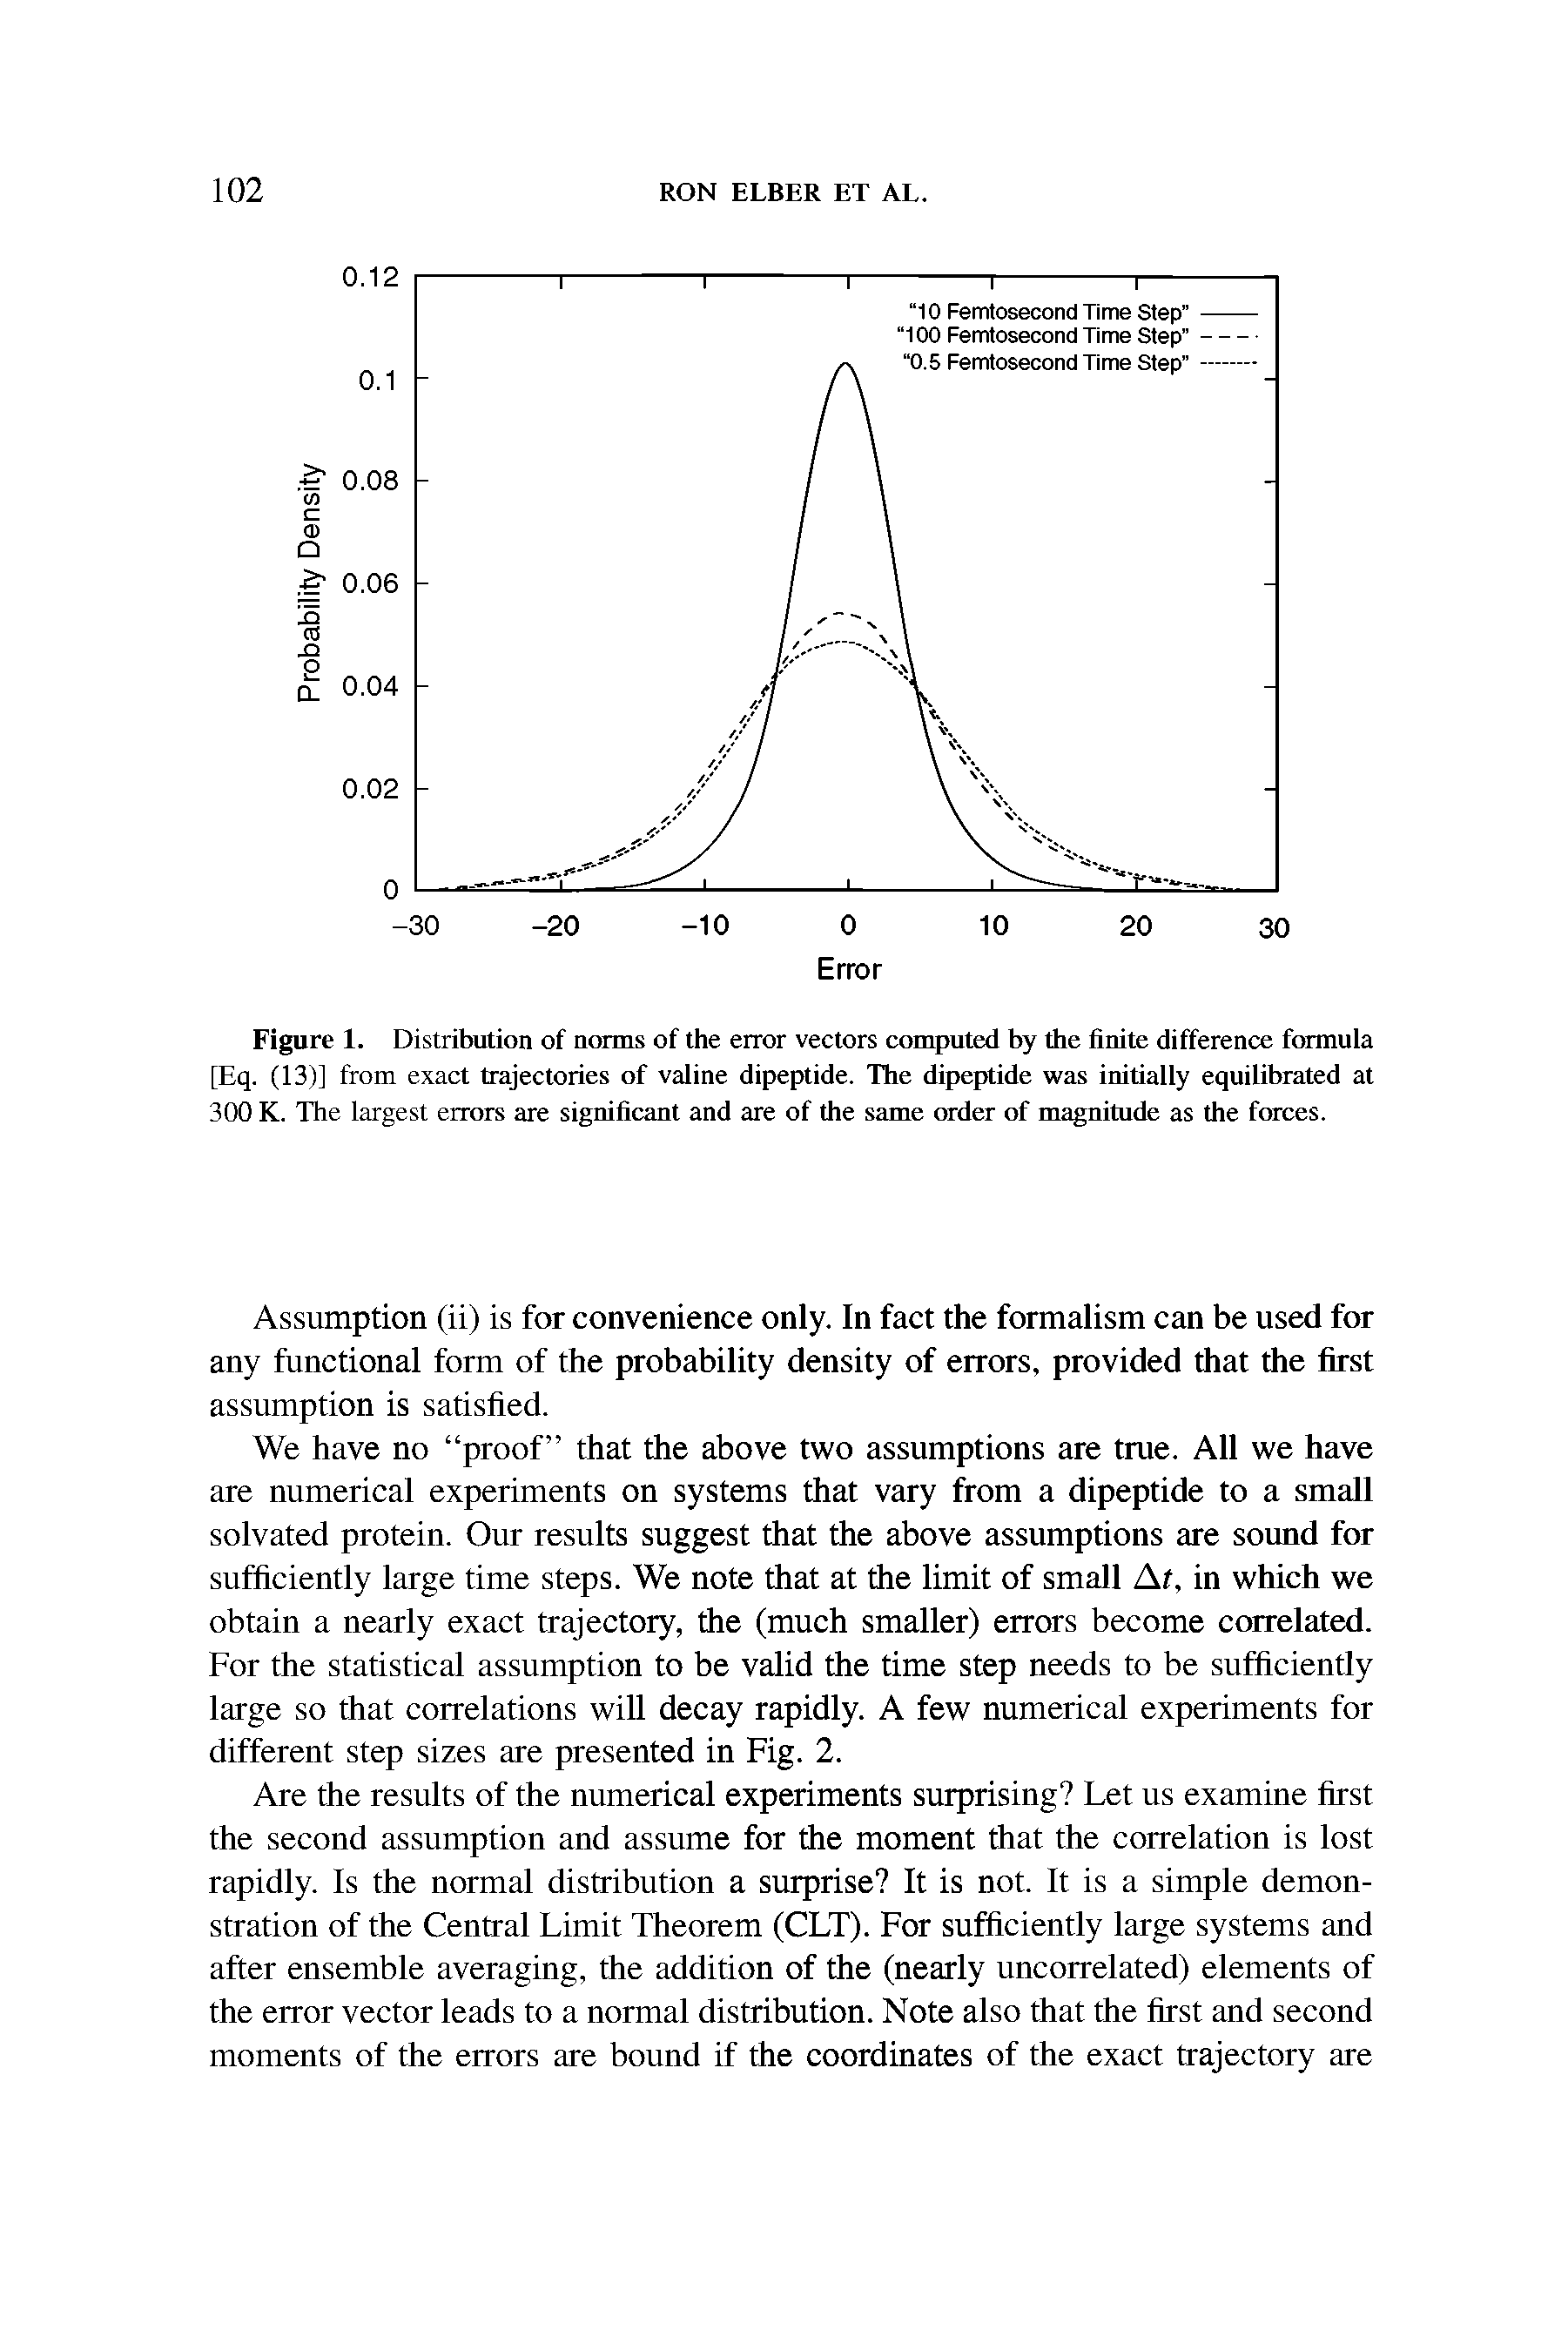 Figure 1. Distribution of norms of the error vectors computed by the finite difference formula [Eq. (13)] from exact trajectories of valine dipeptide. The dipeptide was initially equilibrated at 300 K. The largest errors are significant and are of the same order of magnitude as the forces.